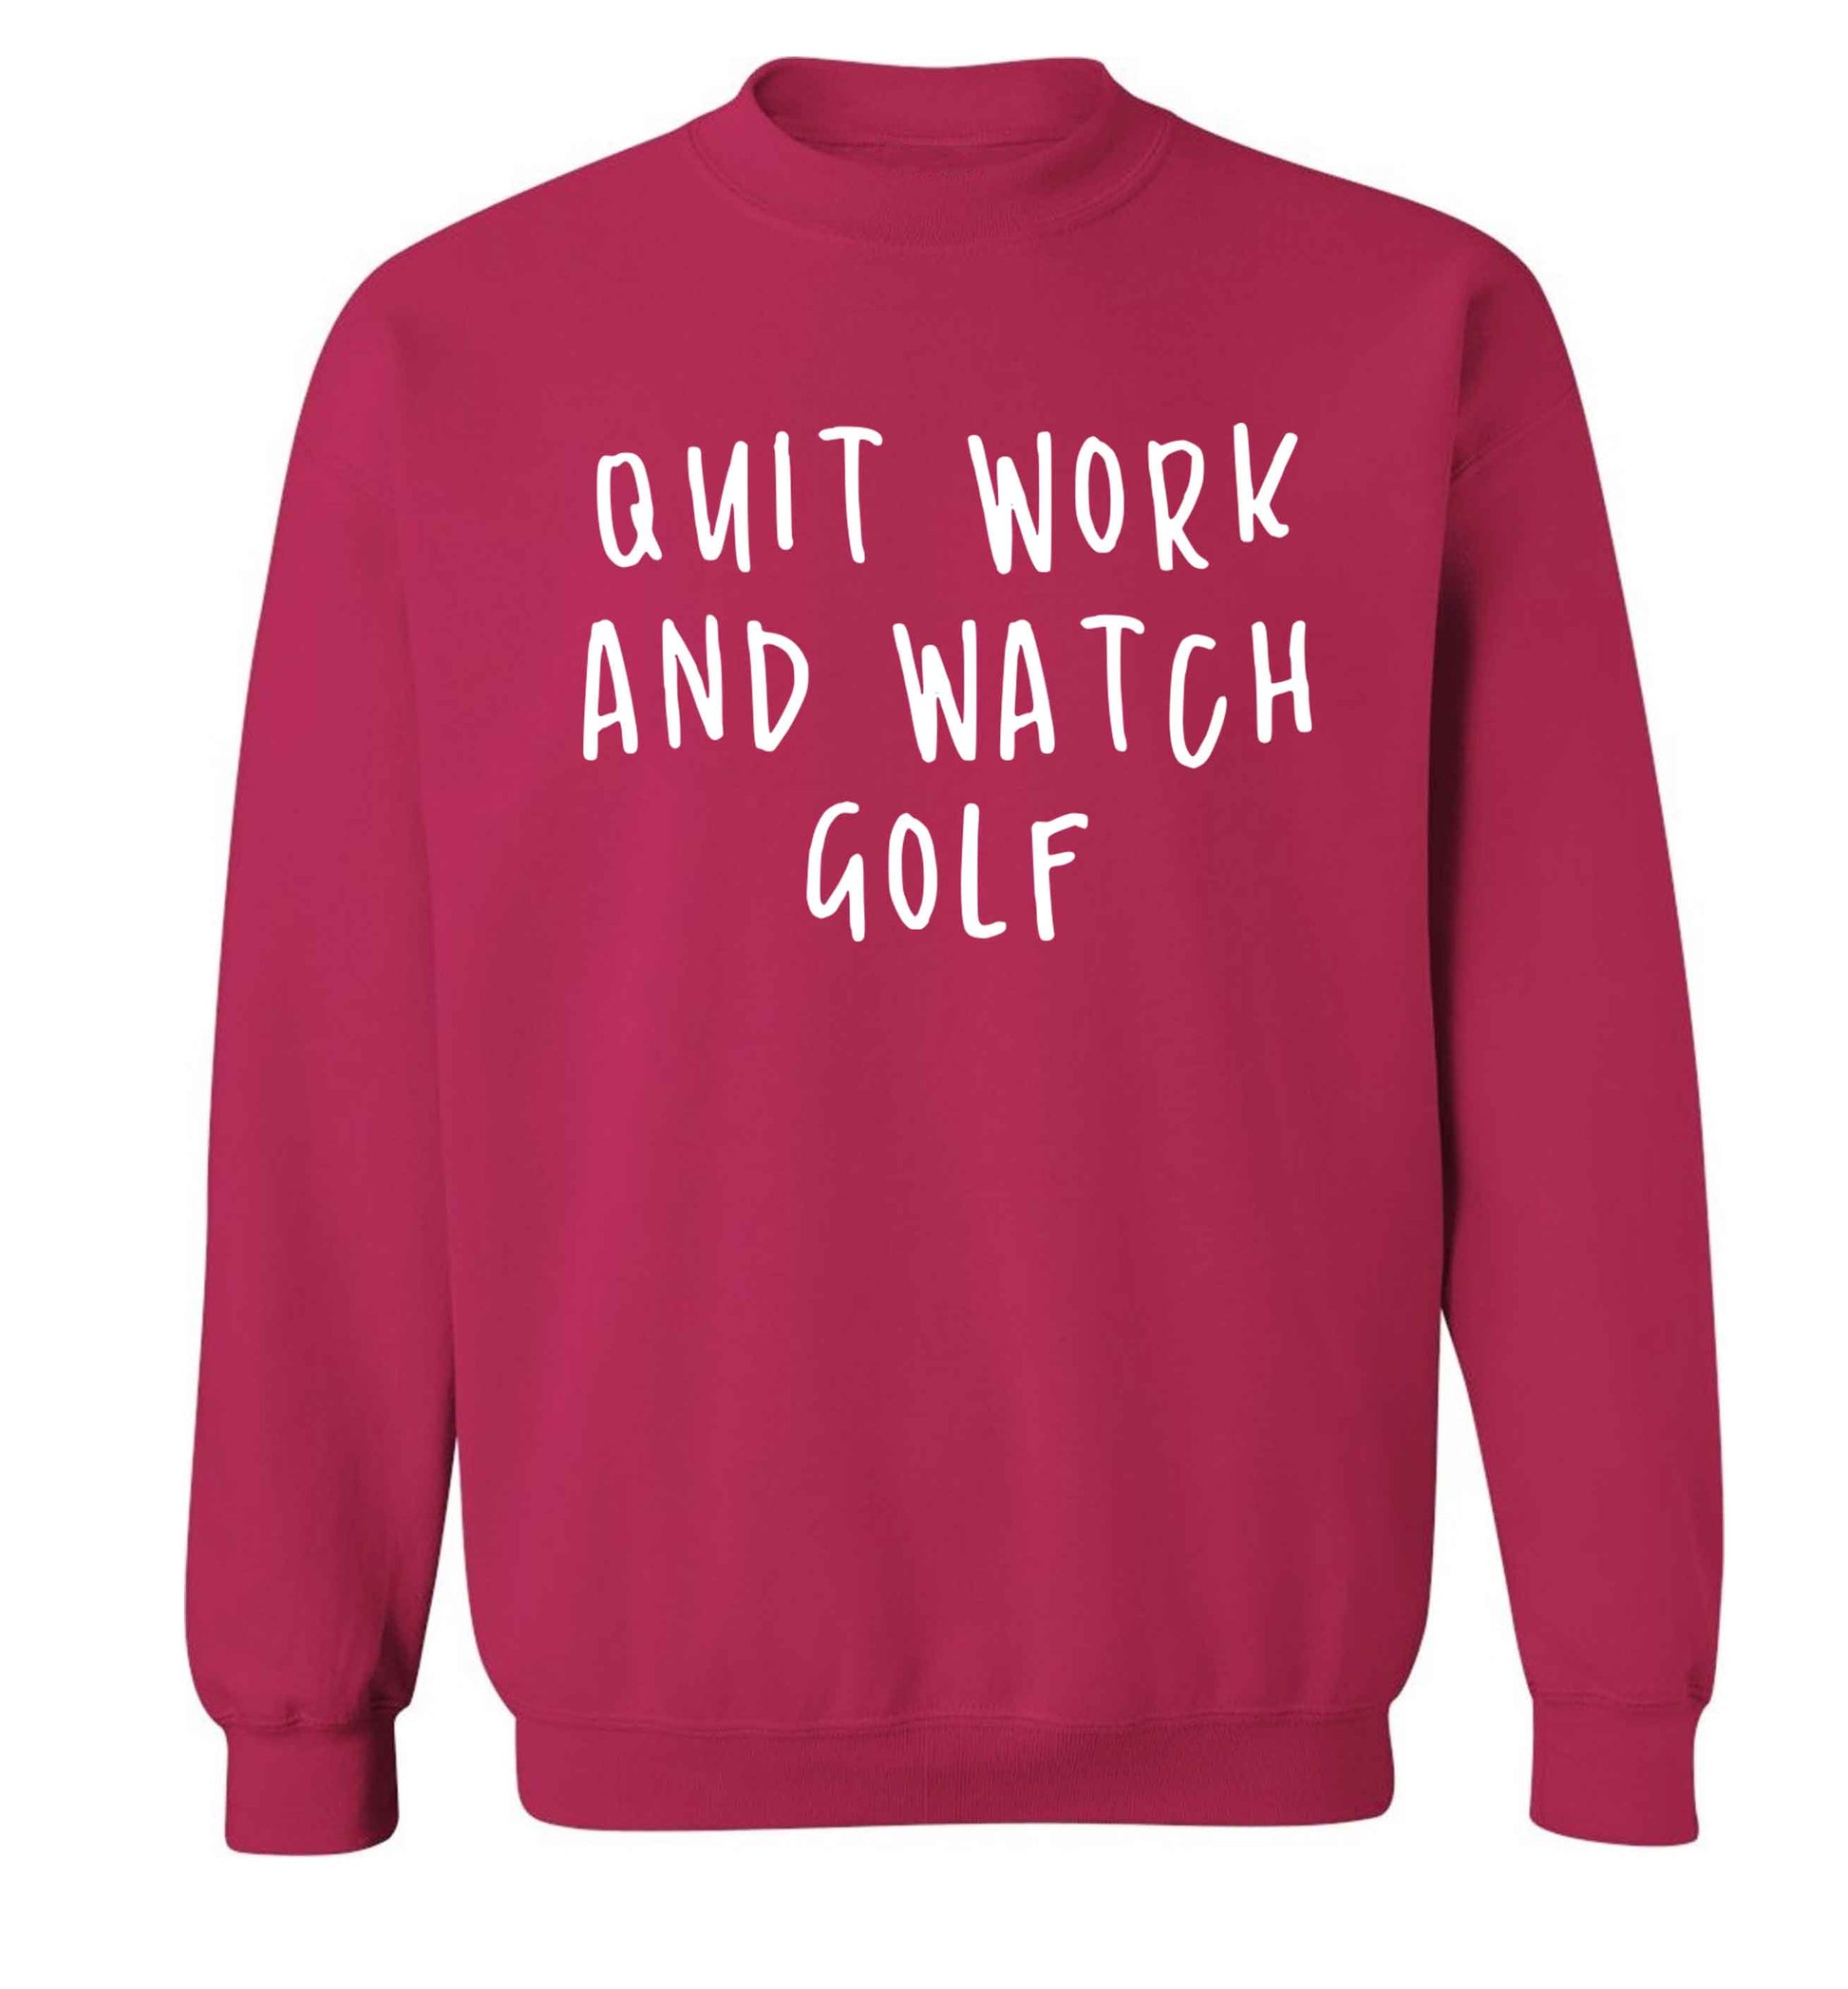 Quit work and watch golf Adult's unisex pink Sweater 2XL